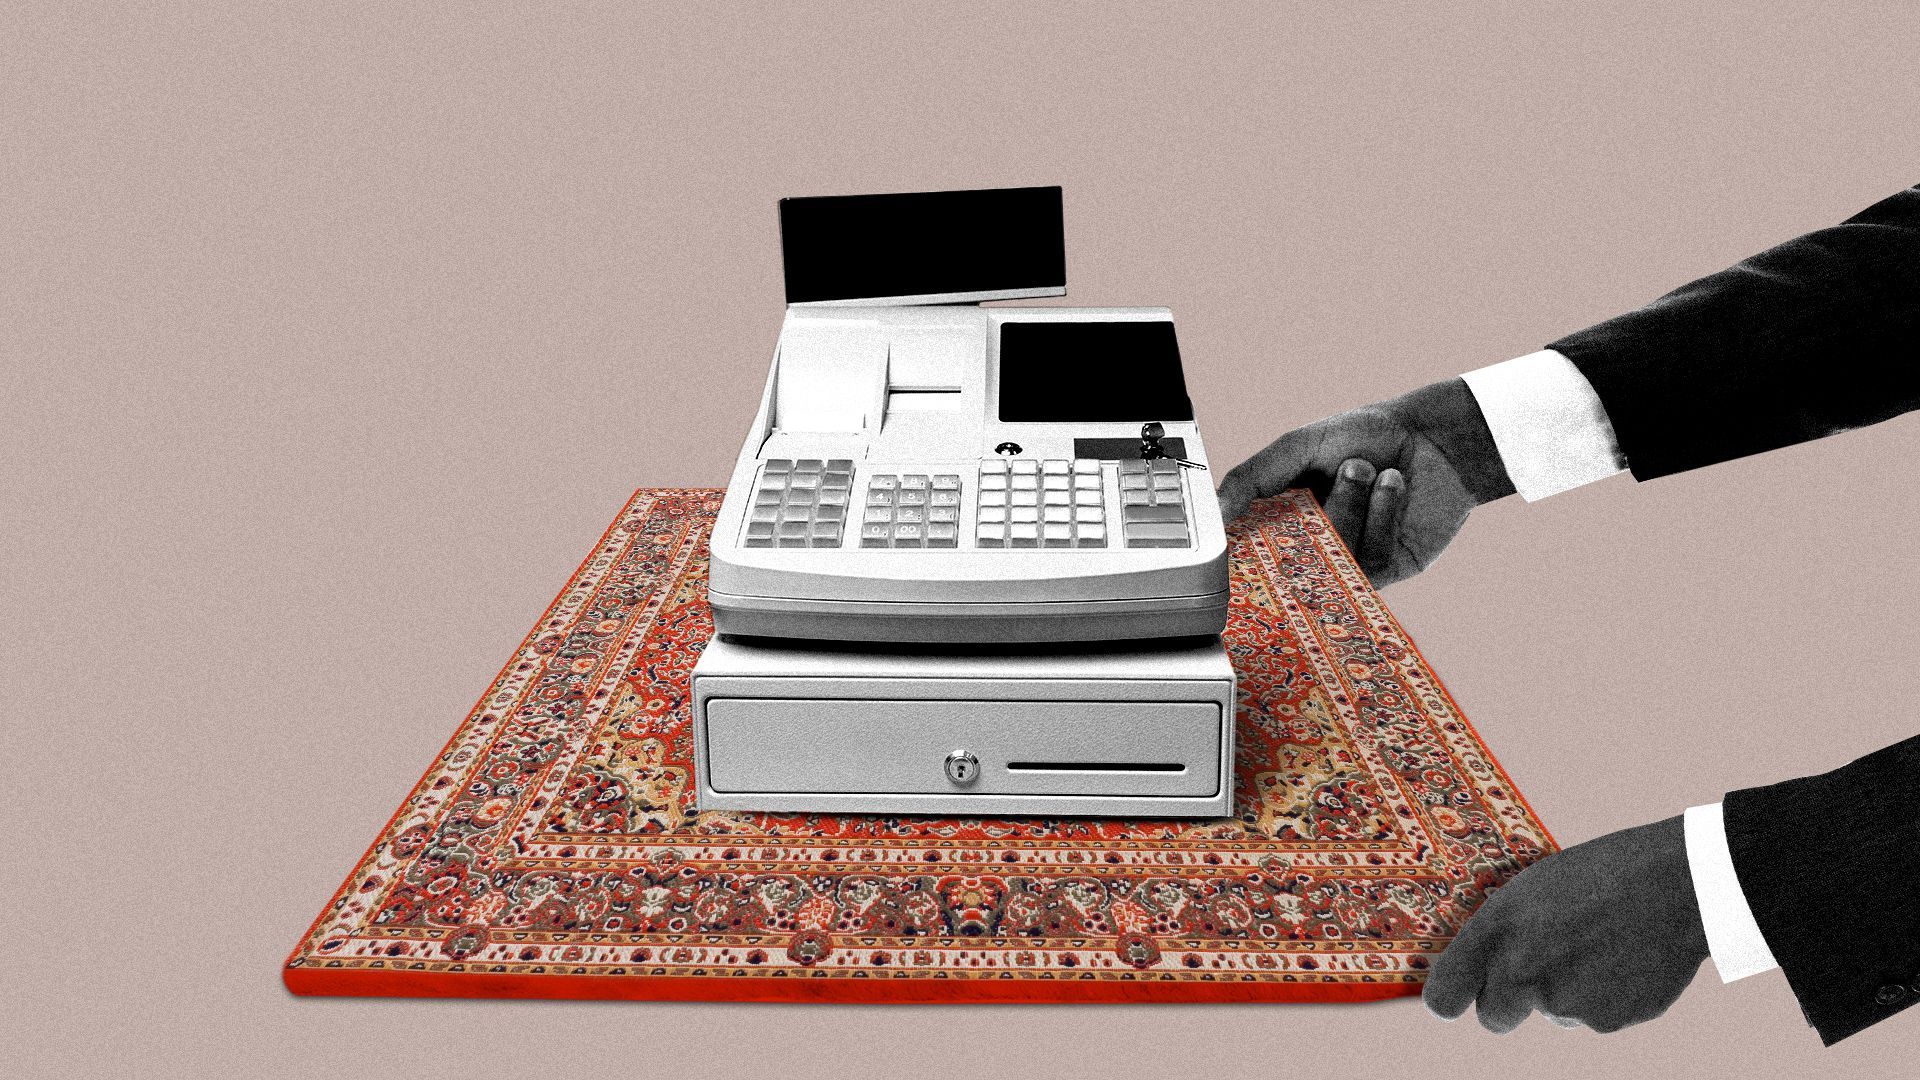 Illustration of a cash register on a rug with a pair of hands about to pull on the rug.  